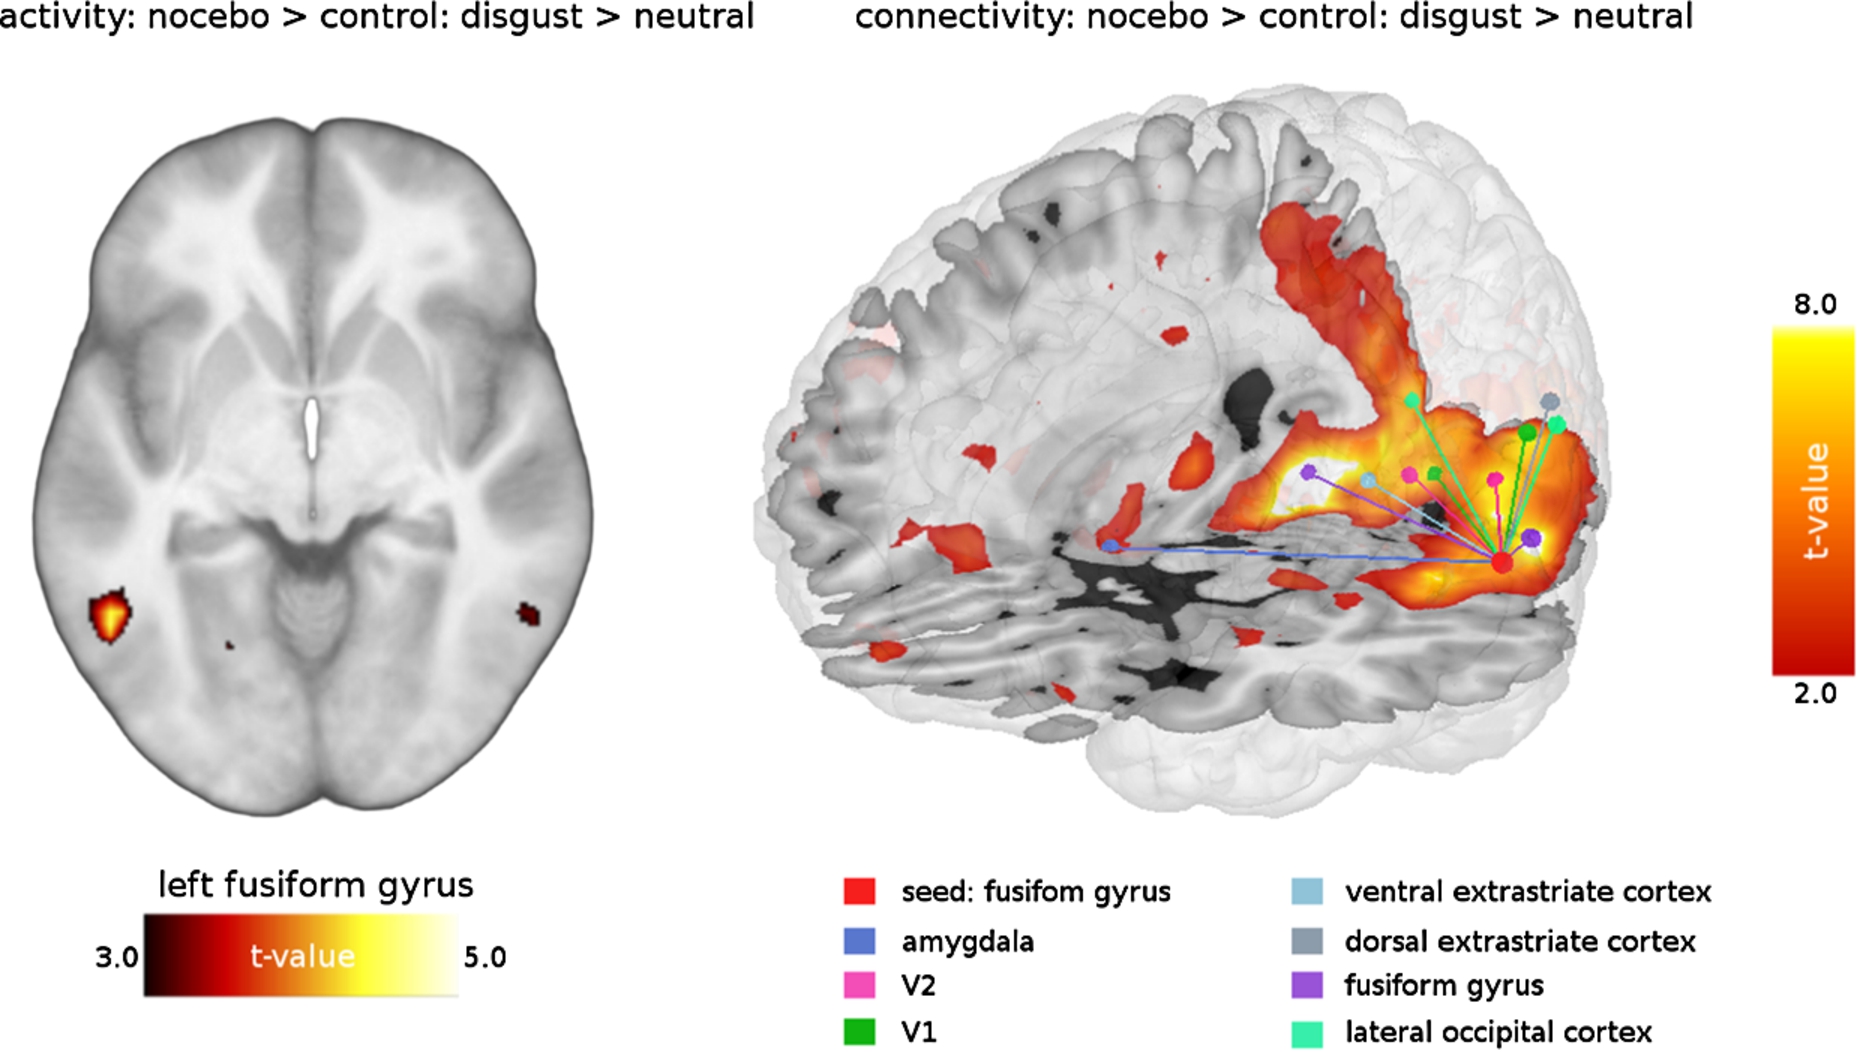 Nocebo-related activity and connectivity of fusiform gyrus during disgust elicitation.